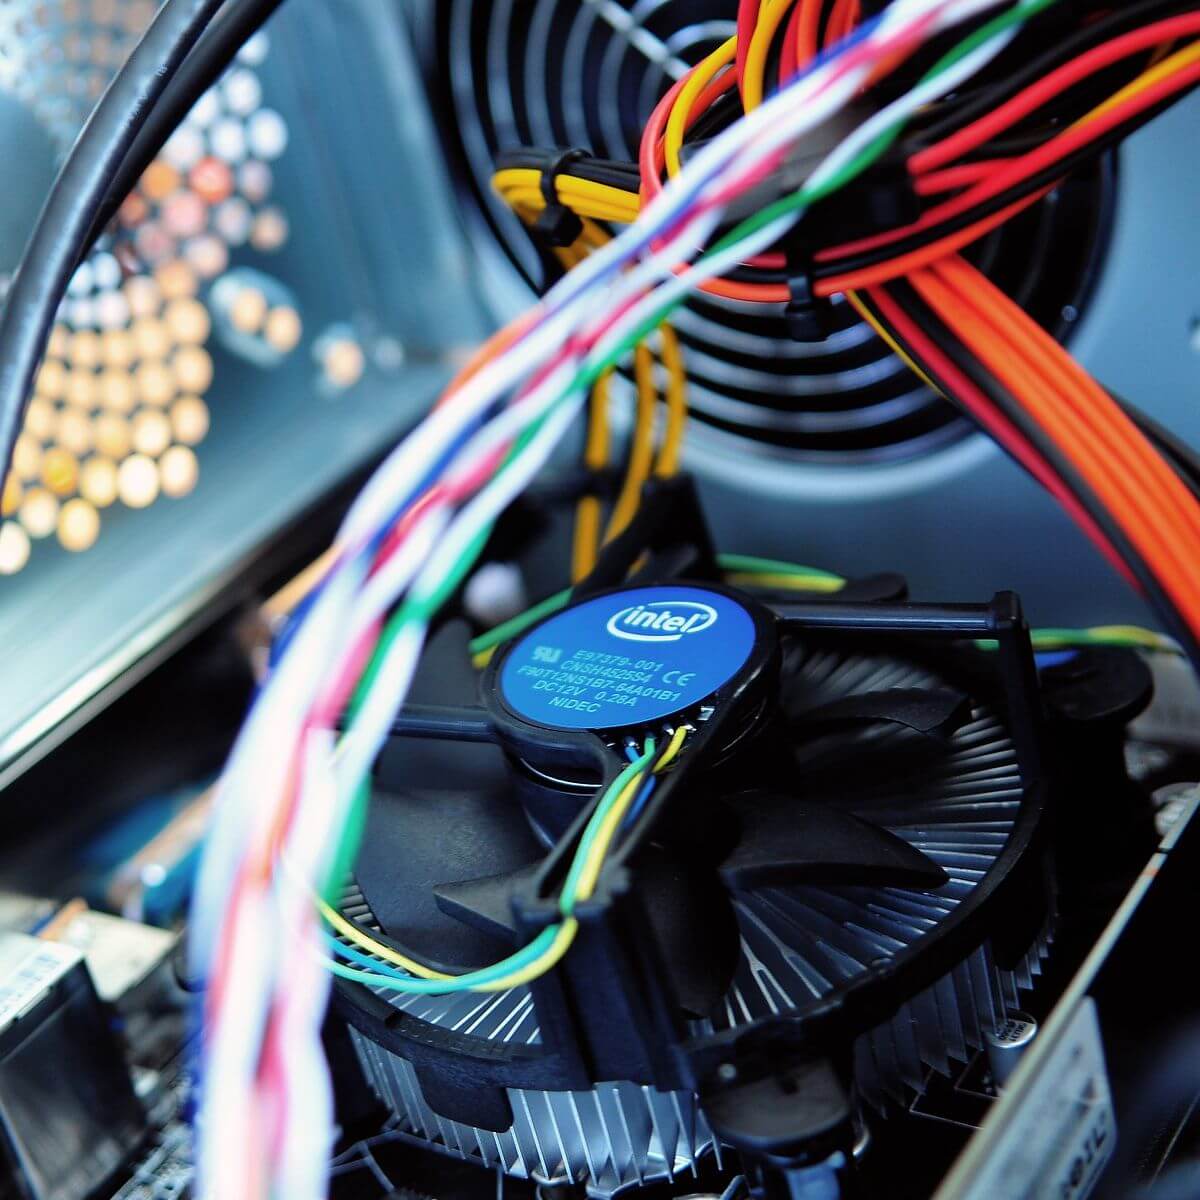 Can't access BIOS on Win 7 and Win 10 - Computer parts fan